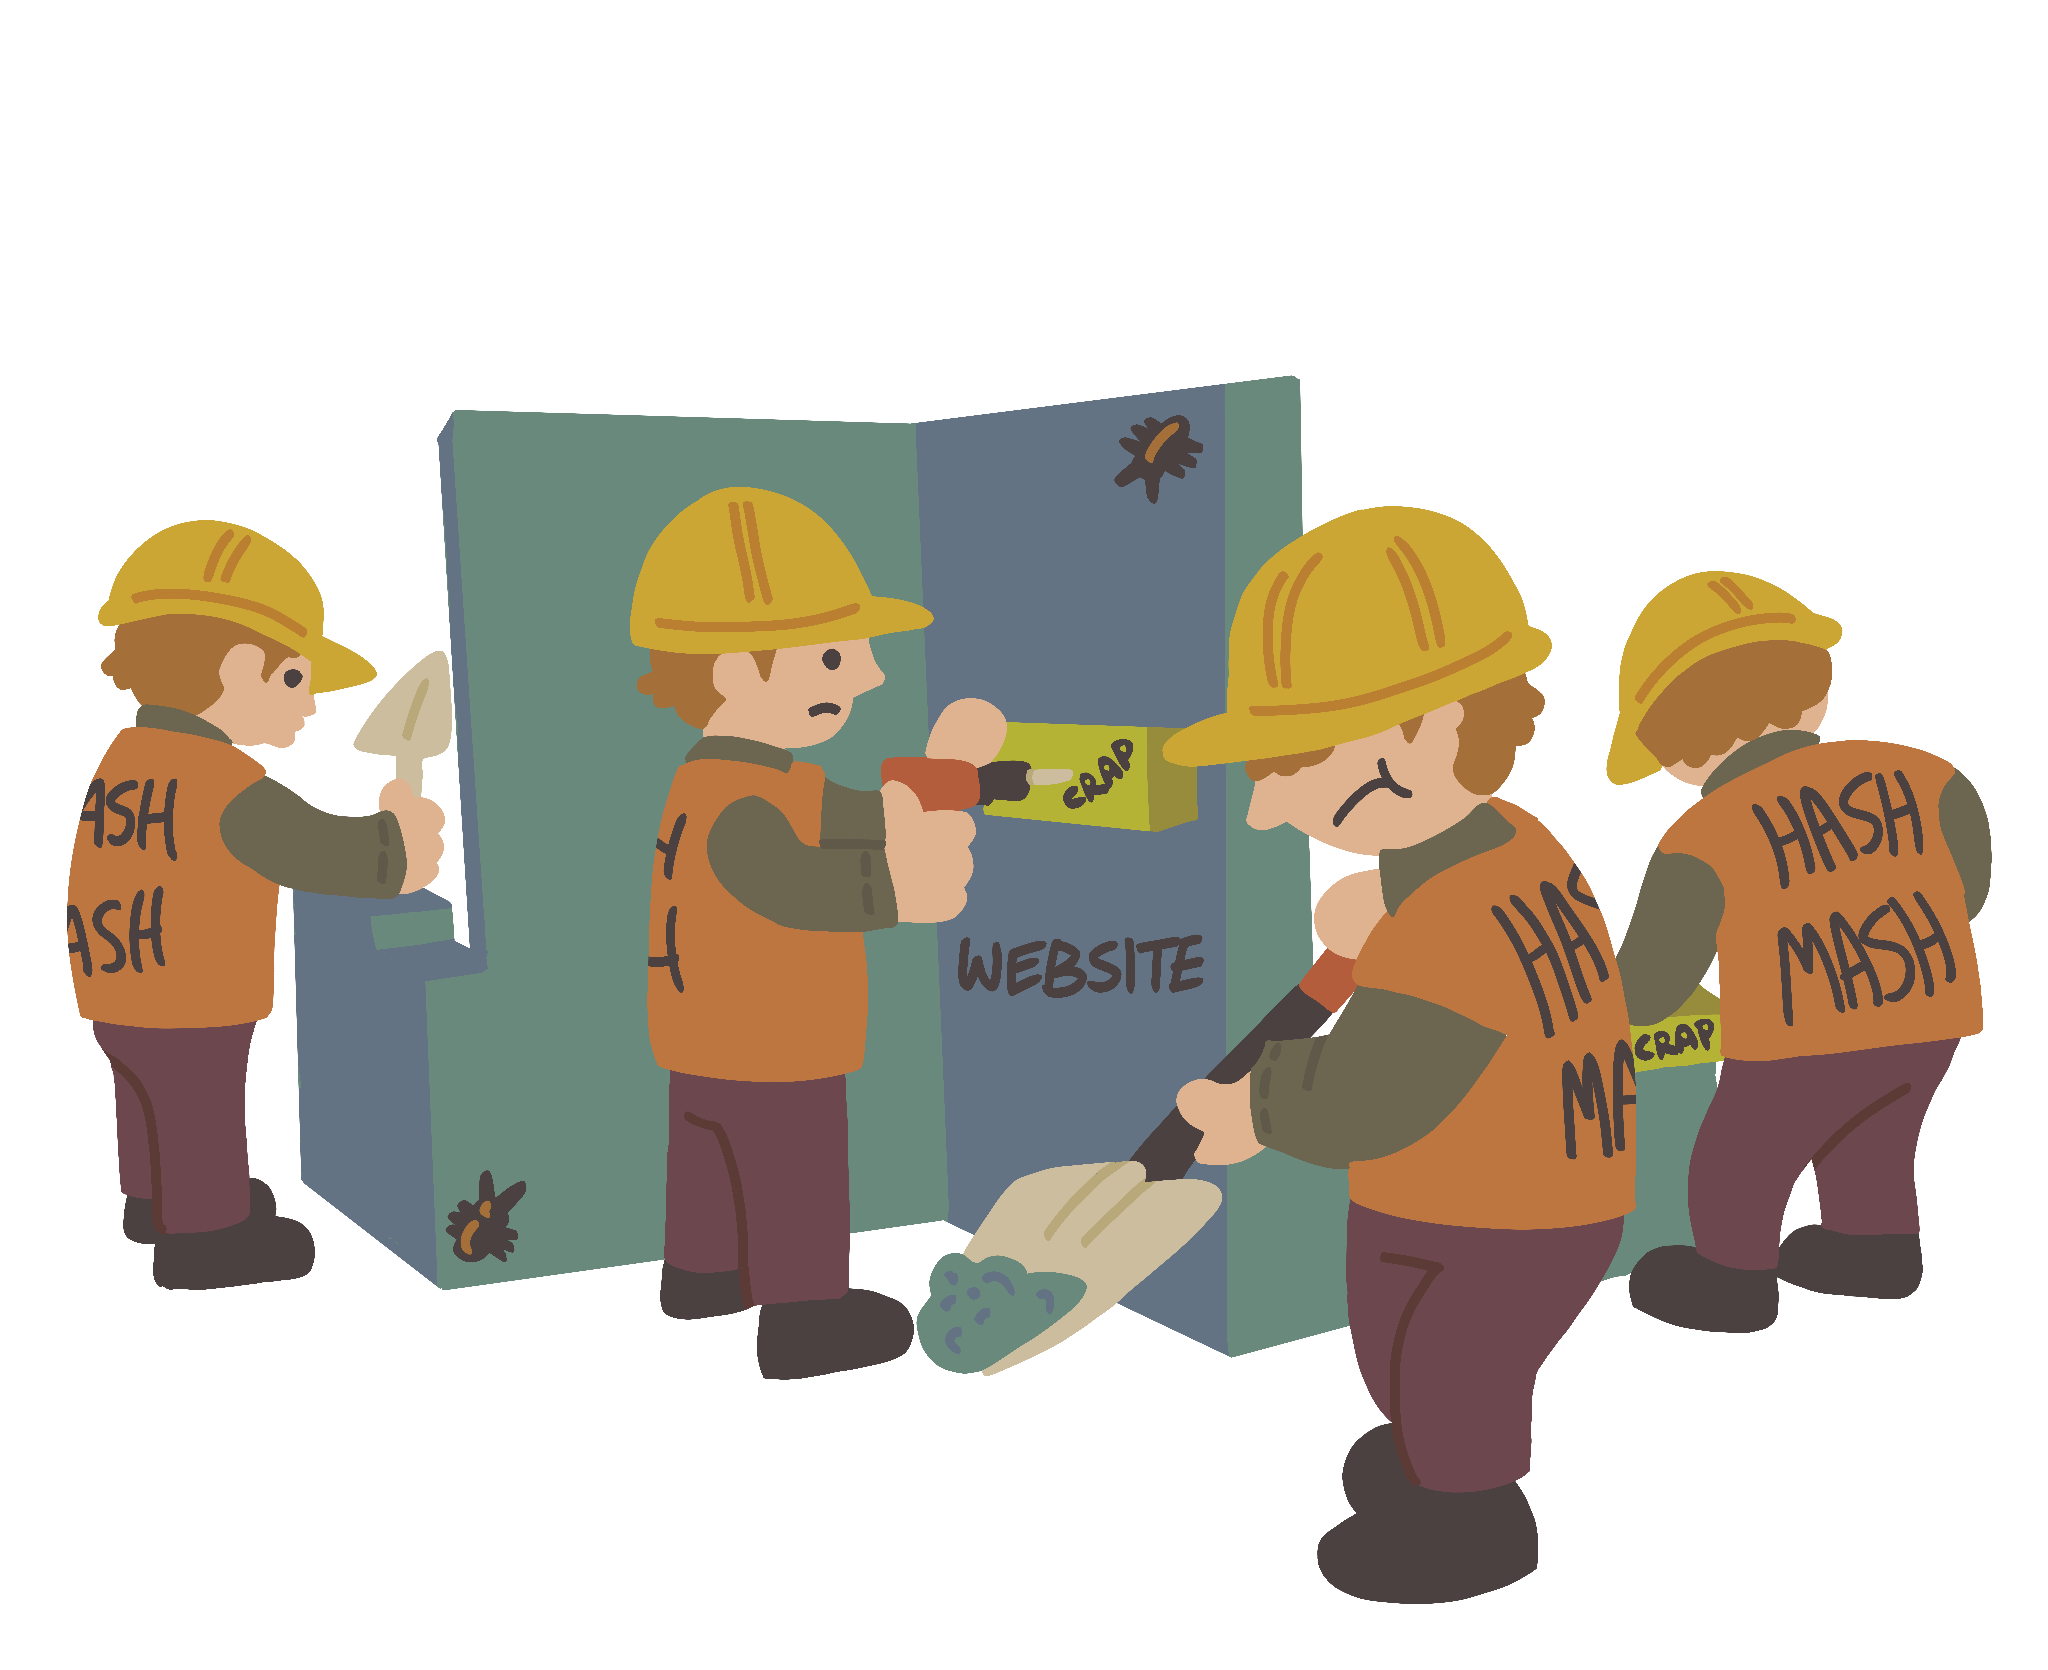 A drawing of four identical looking people wearing yellow hardhats and vests that say 'Hash Mash' on the back building a wall labeled 'Website'. Two of them are attaching bricks to the wall that are labeled 'Crap'.